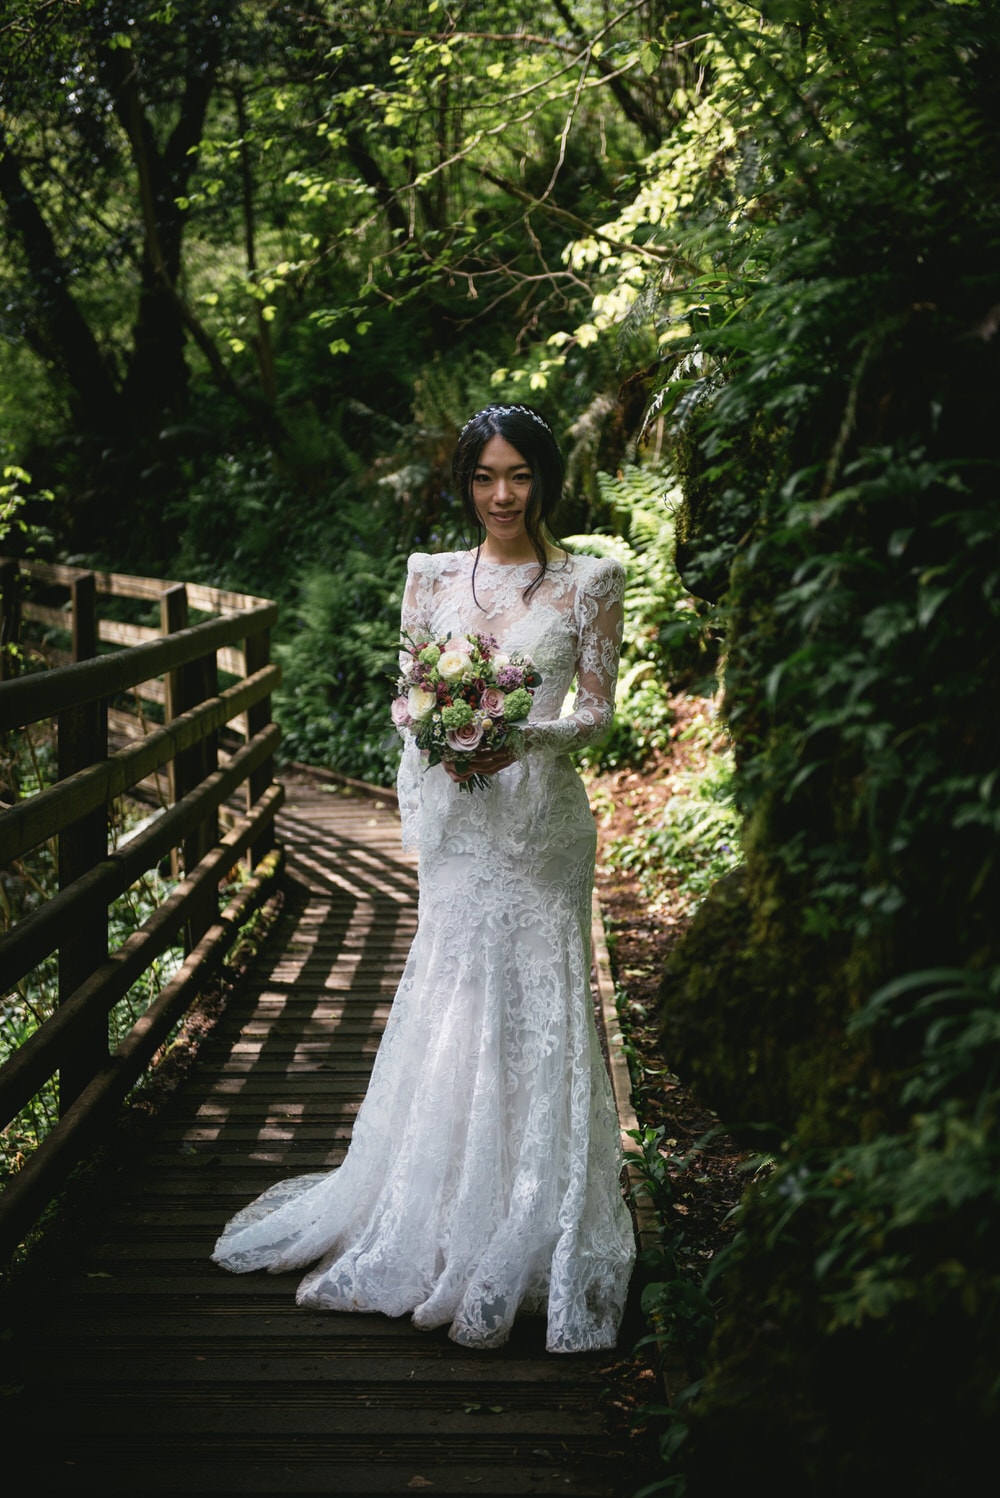 The bride's stunning bridal bouquet, featuring wildflowers and eucalyptus leaves during their Northern Ireland elopement.